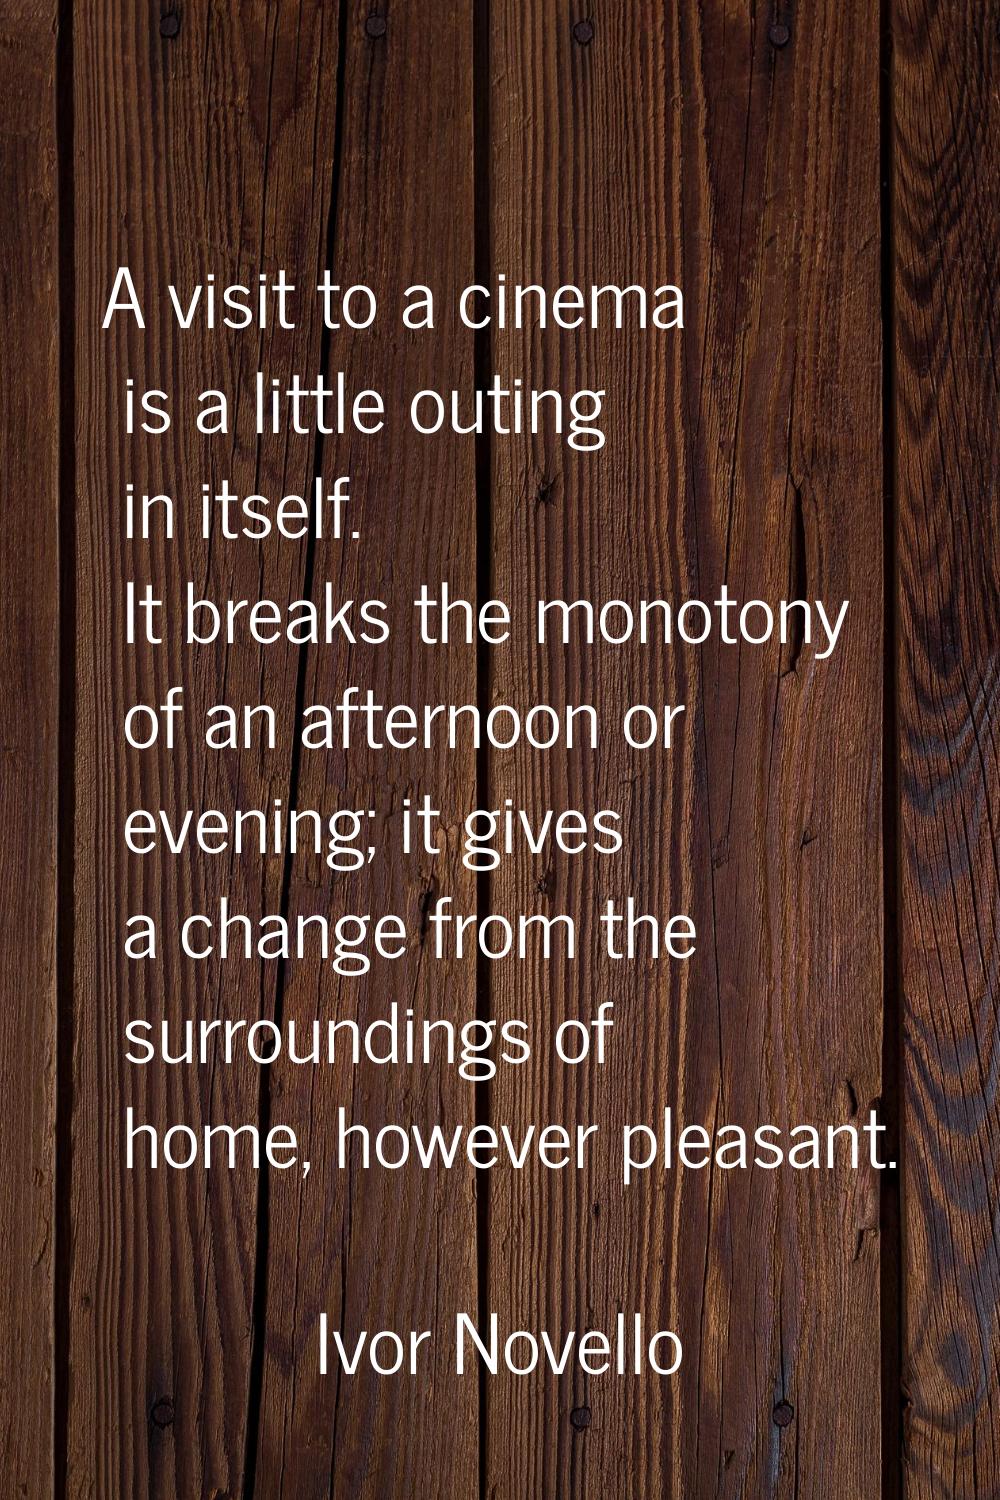 A visit to a cinema is a little outing in itself. It breaks the monotony of an afternoon or evening